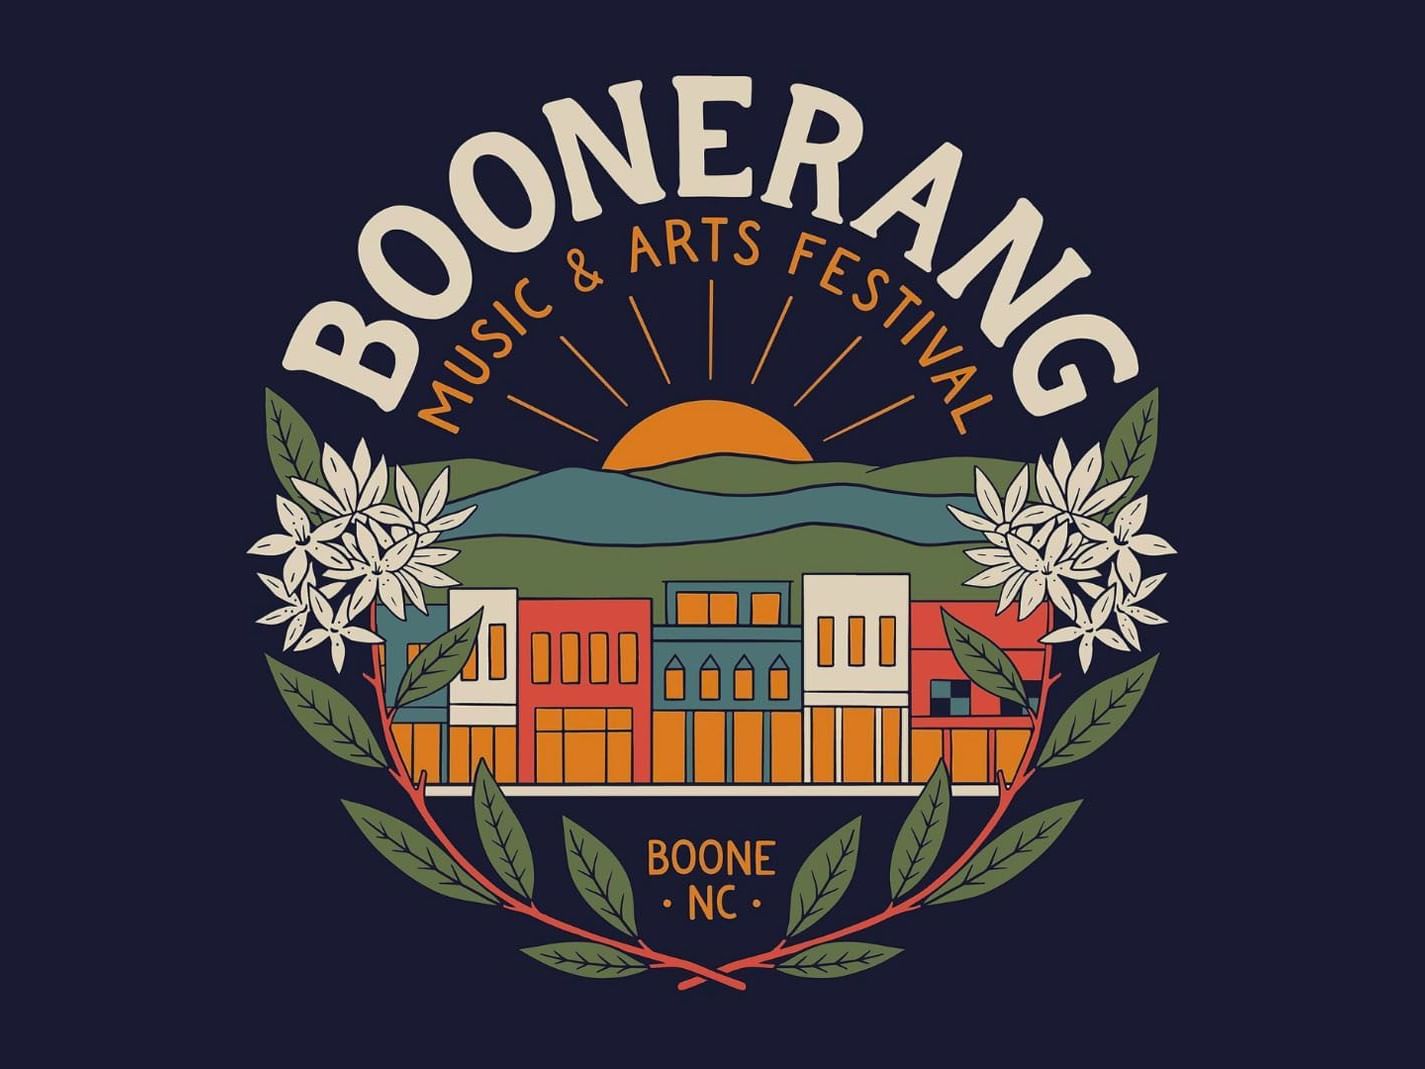 Boonerang Music & Arts Festival logo used at The Embers Hotel